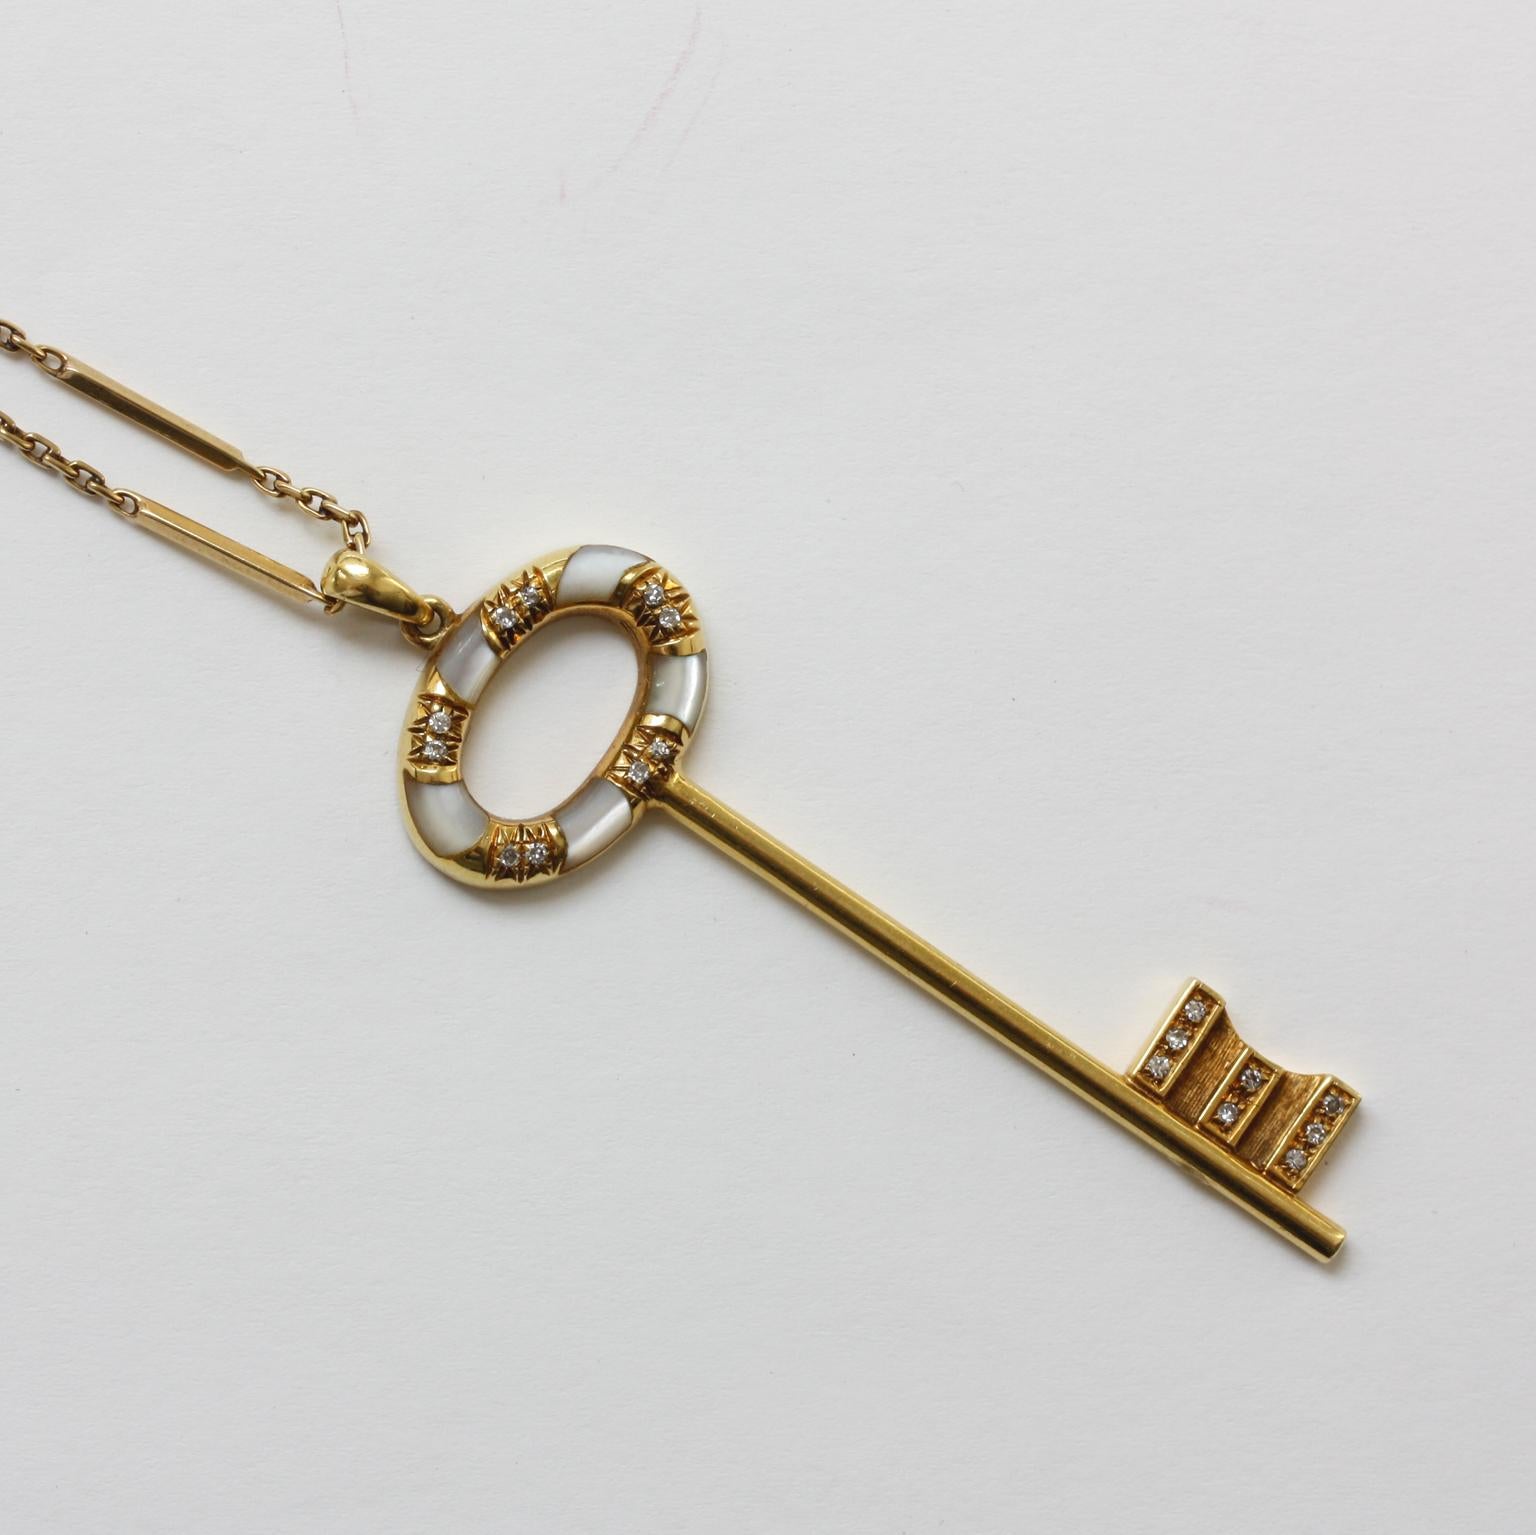 Women's or Men's Gold, Diamond and Mother of Pearl Key Pendant